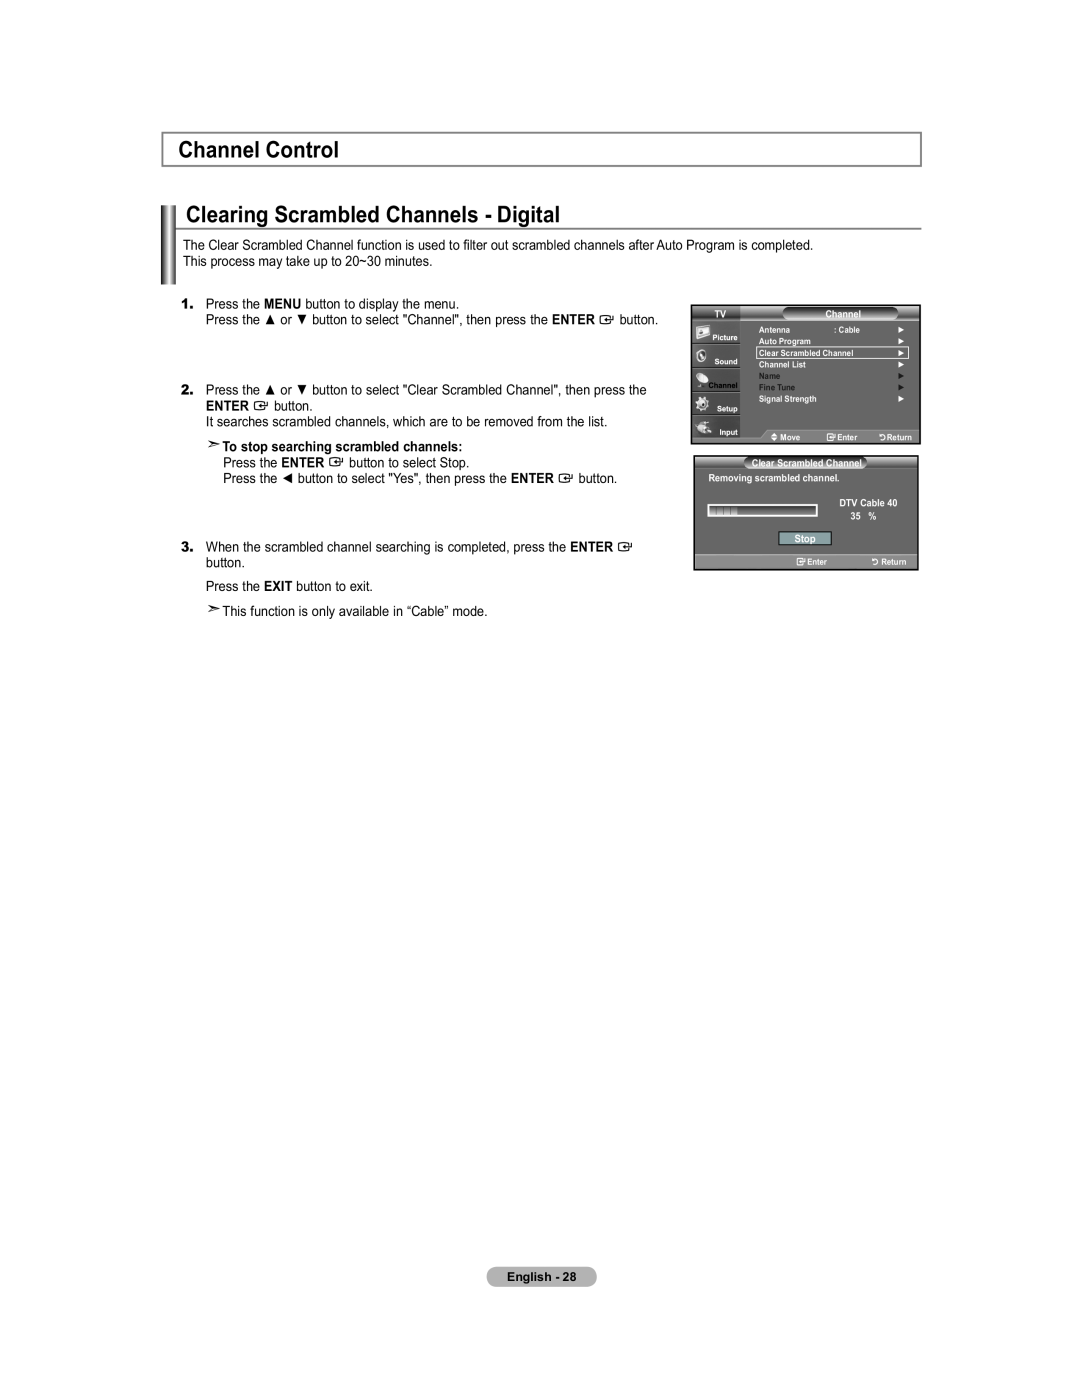 Samsung 451 Channel Control Clearing Scrambled Channels - Digital, To stop searching scrambled channels, Enter, Name 